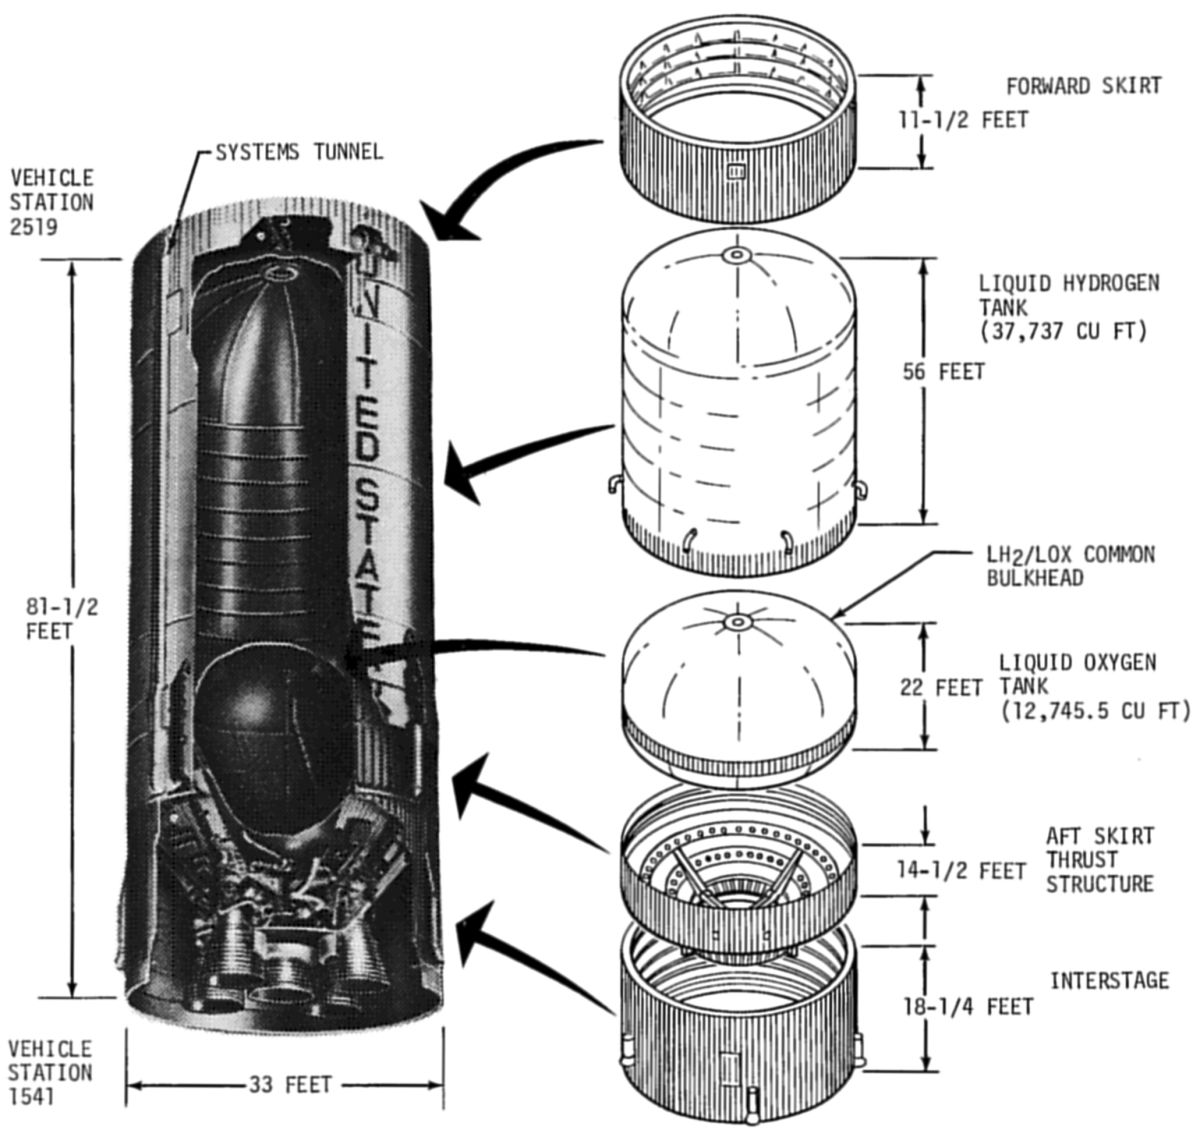 The Common Bulkhead for the Saturn S-II Vehicle